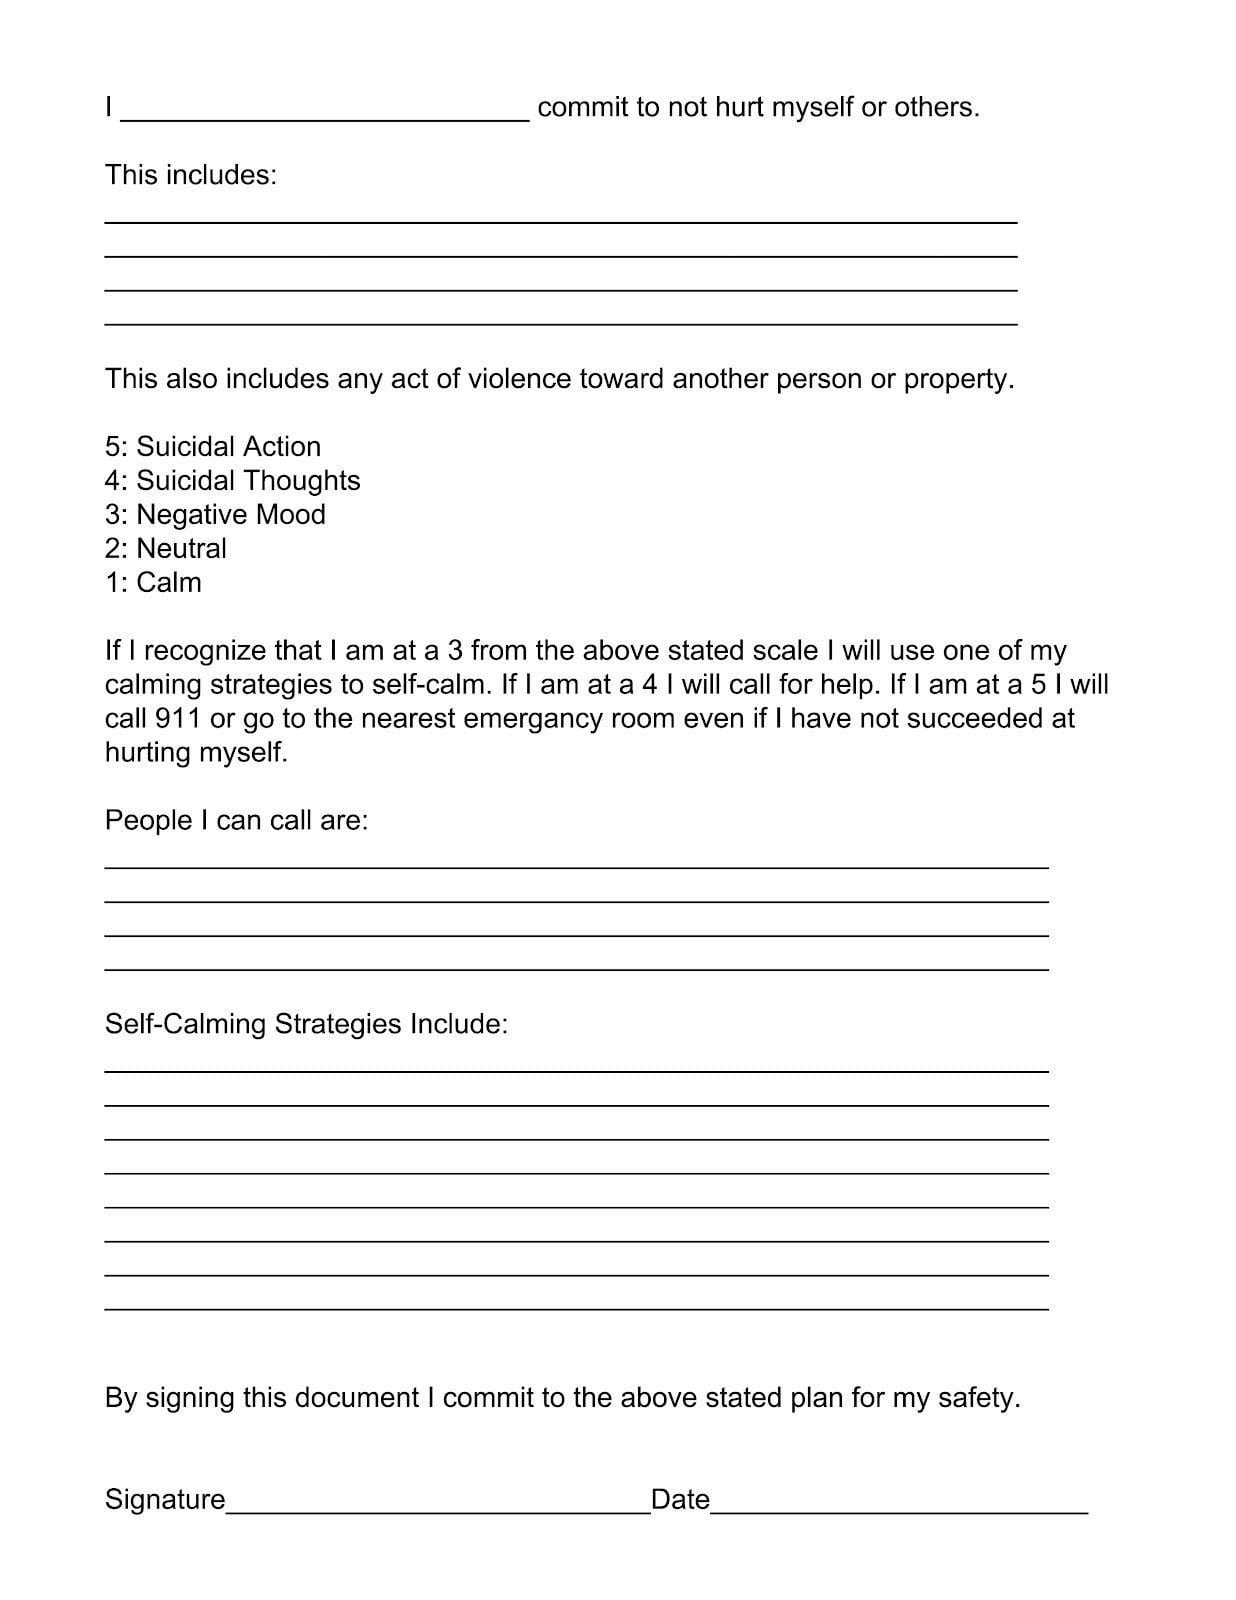 001 Plan Template Mental Health Crisis  Tinypetition Together With Crisis Prevention Plan Worksheet